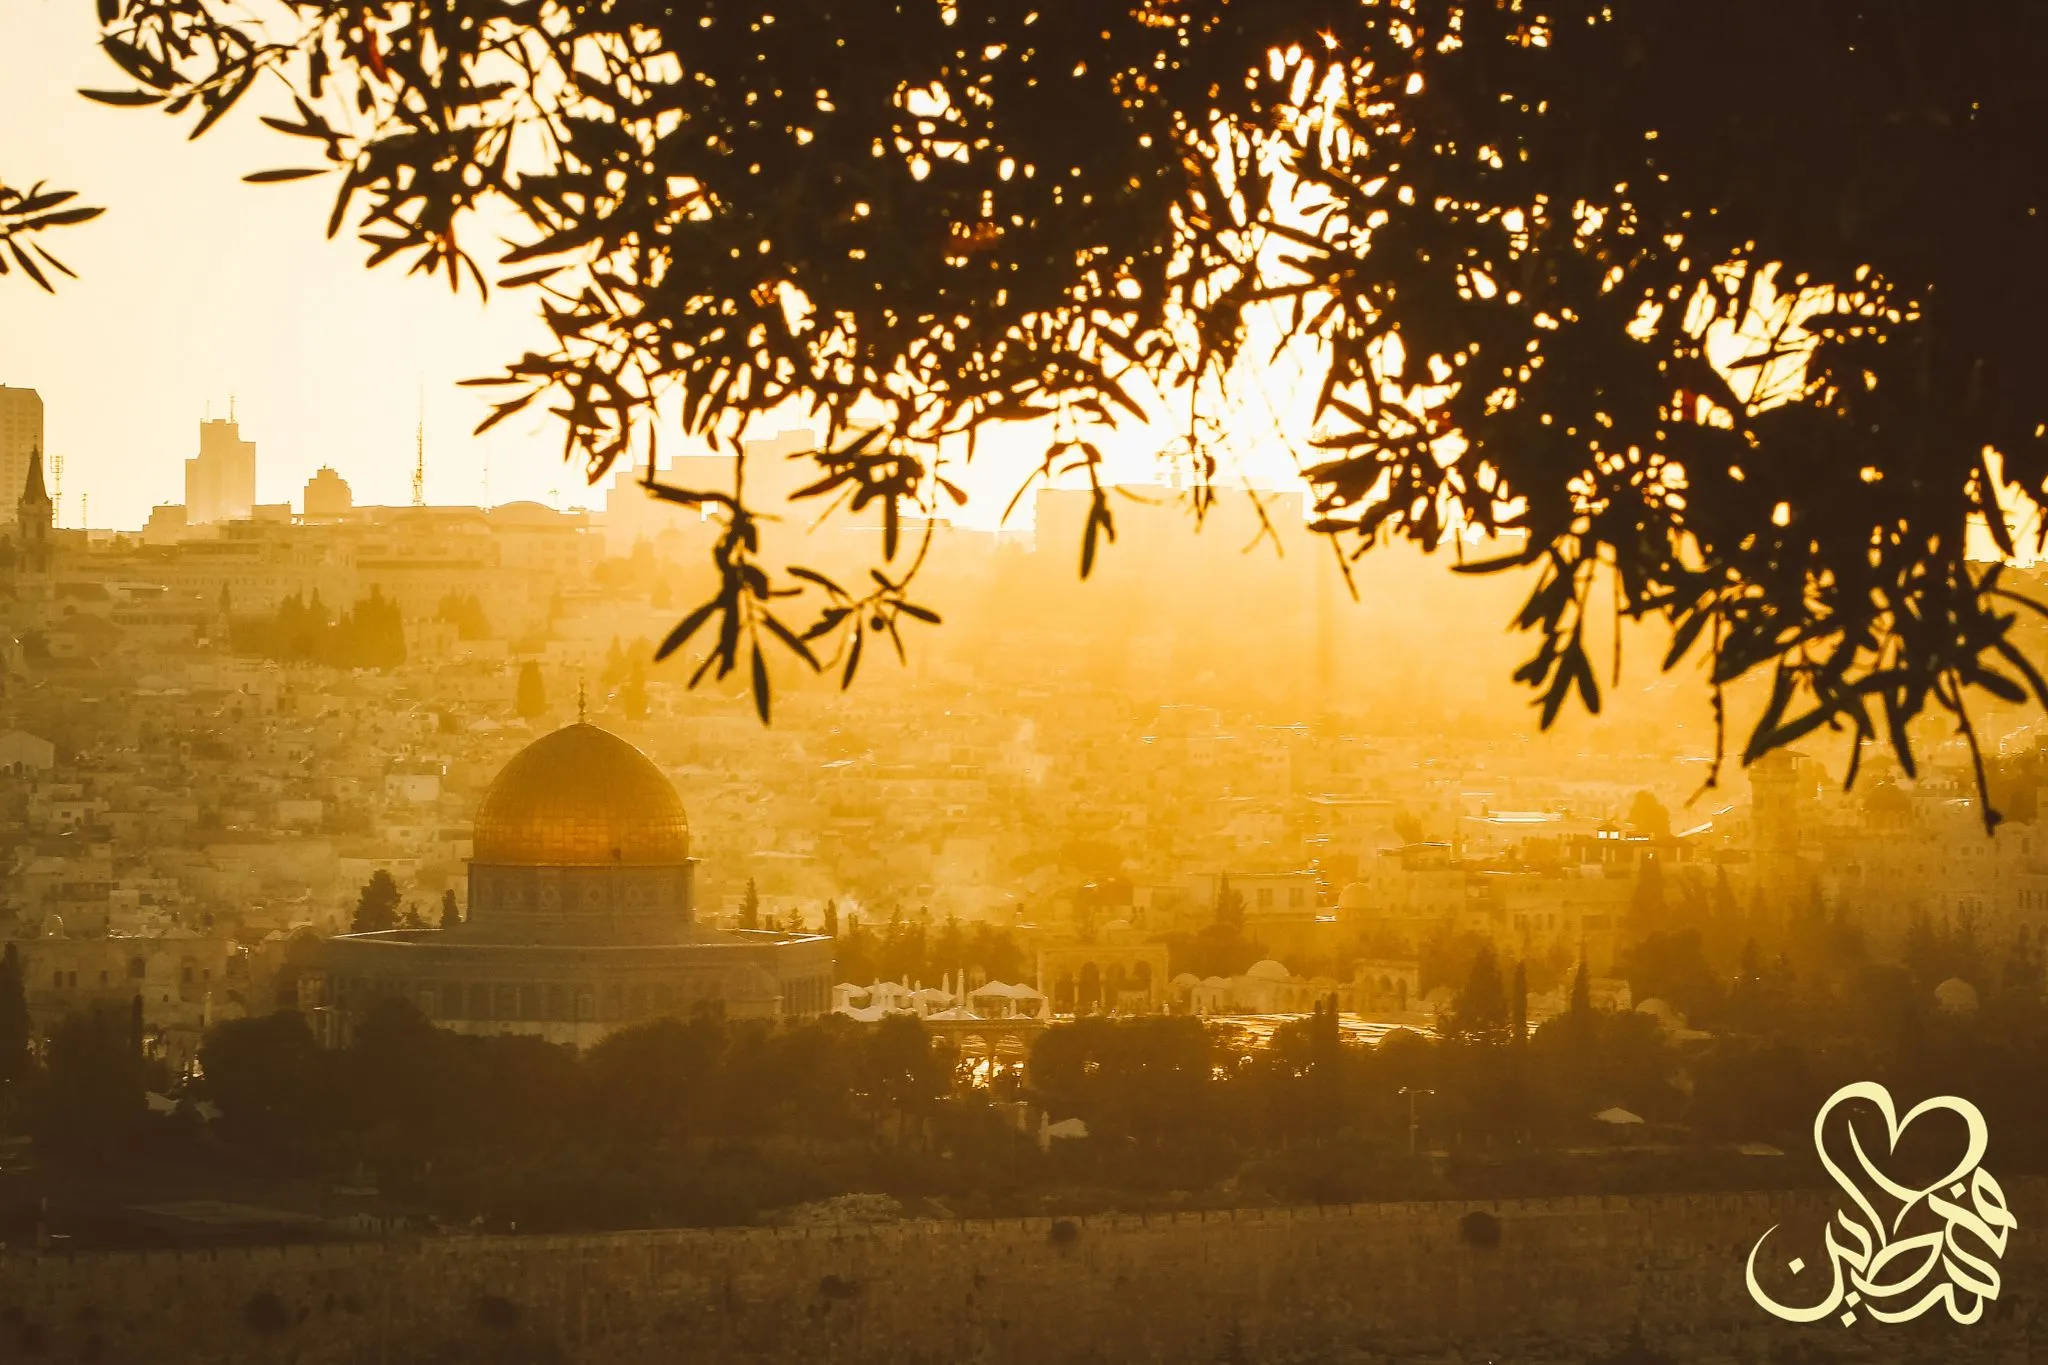 Dome of rock landscape sunset view with olive trees and the walls of jerusalem, Baitul maqdis, Al-Aqsa, Palestine. (Getty Images in Canva) Sign of Palestinian Arabic Calligraphy by Loy.